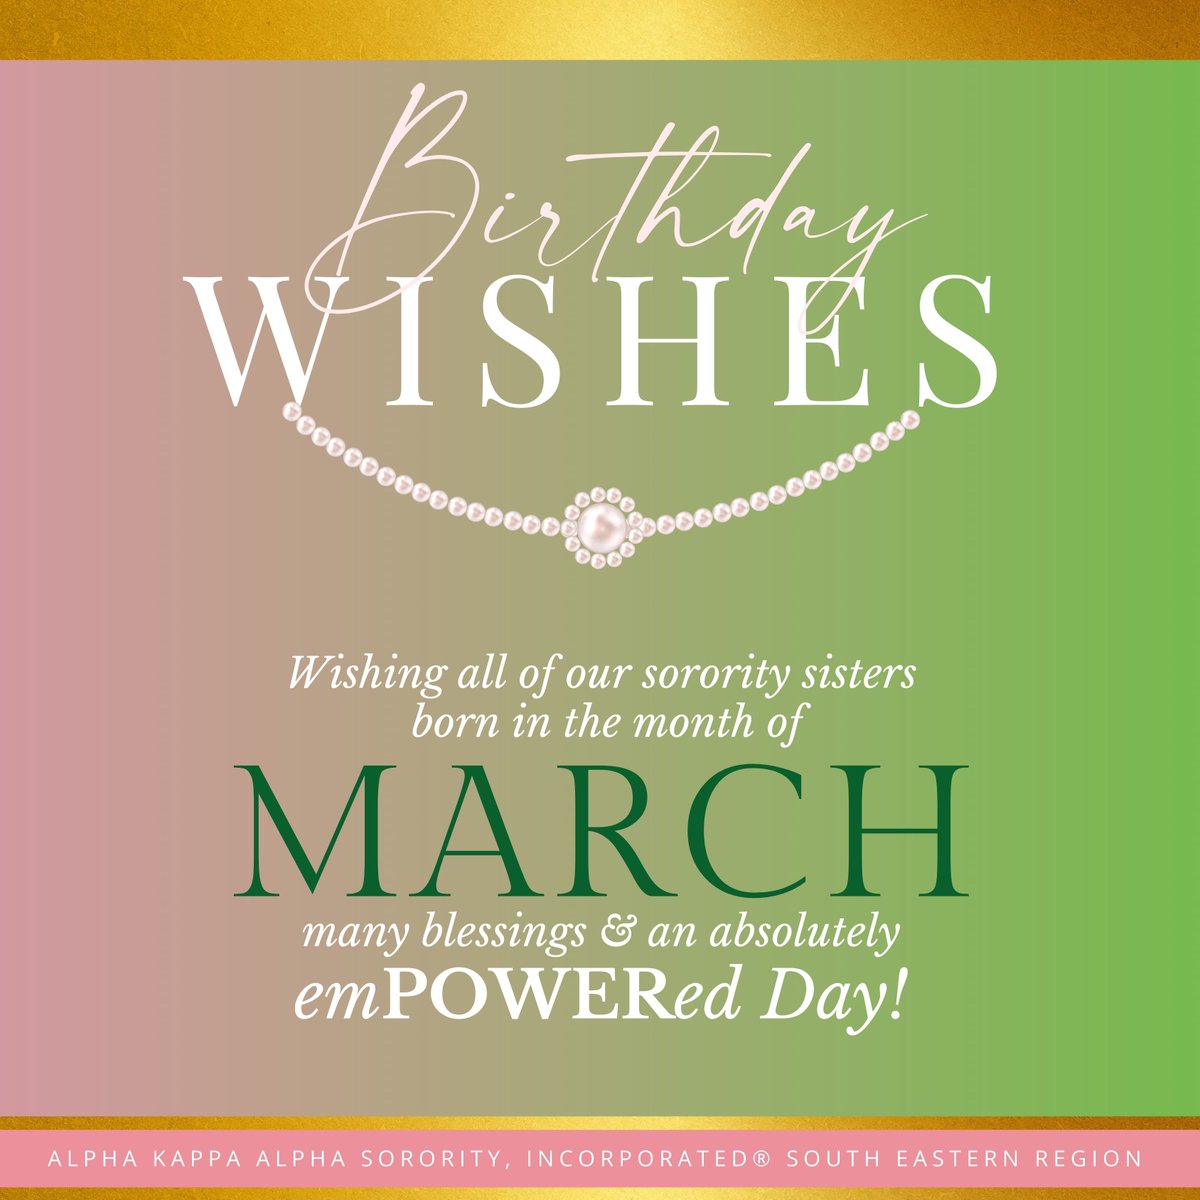 Happy Birthday to all of our South Eastern Region sorority sisters born in March. 💗 💚 #AKA1908 #SoaringWithAKA #SophisticatedSouthEastern #PowerOfUs